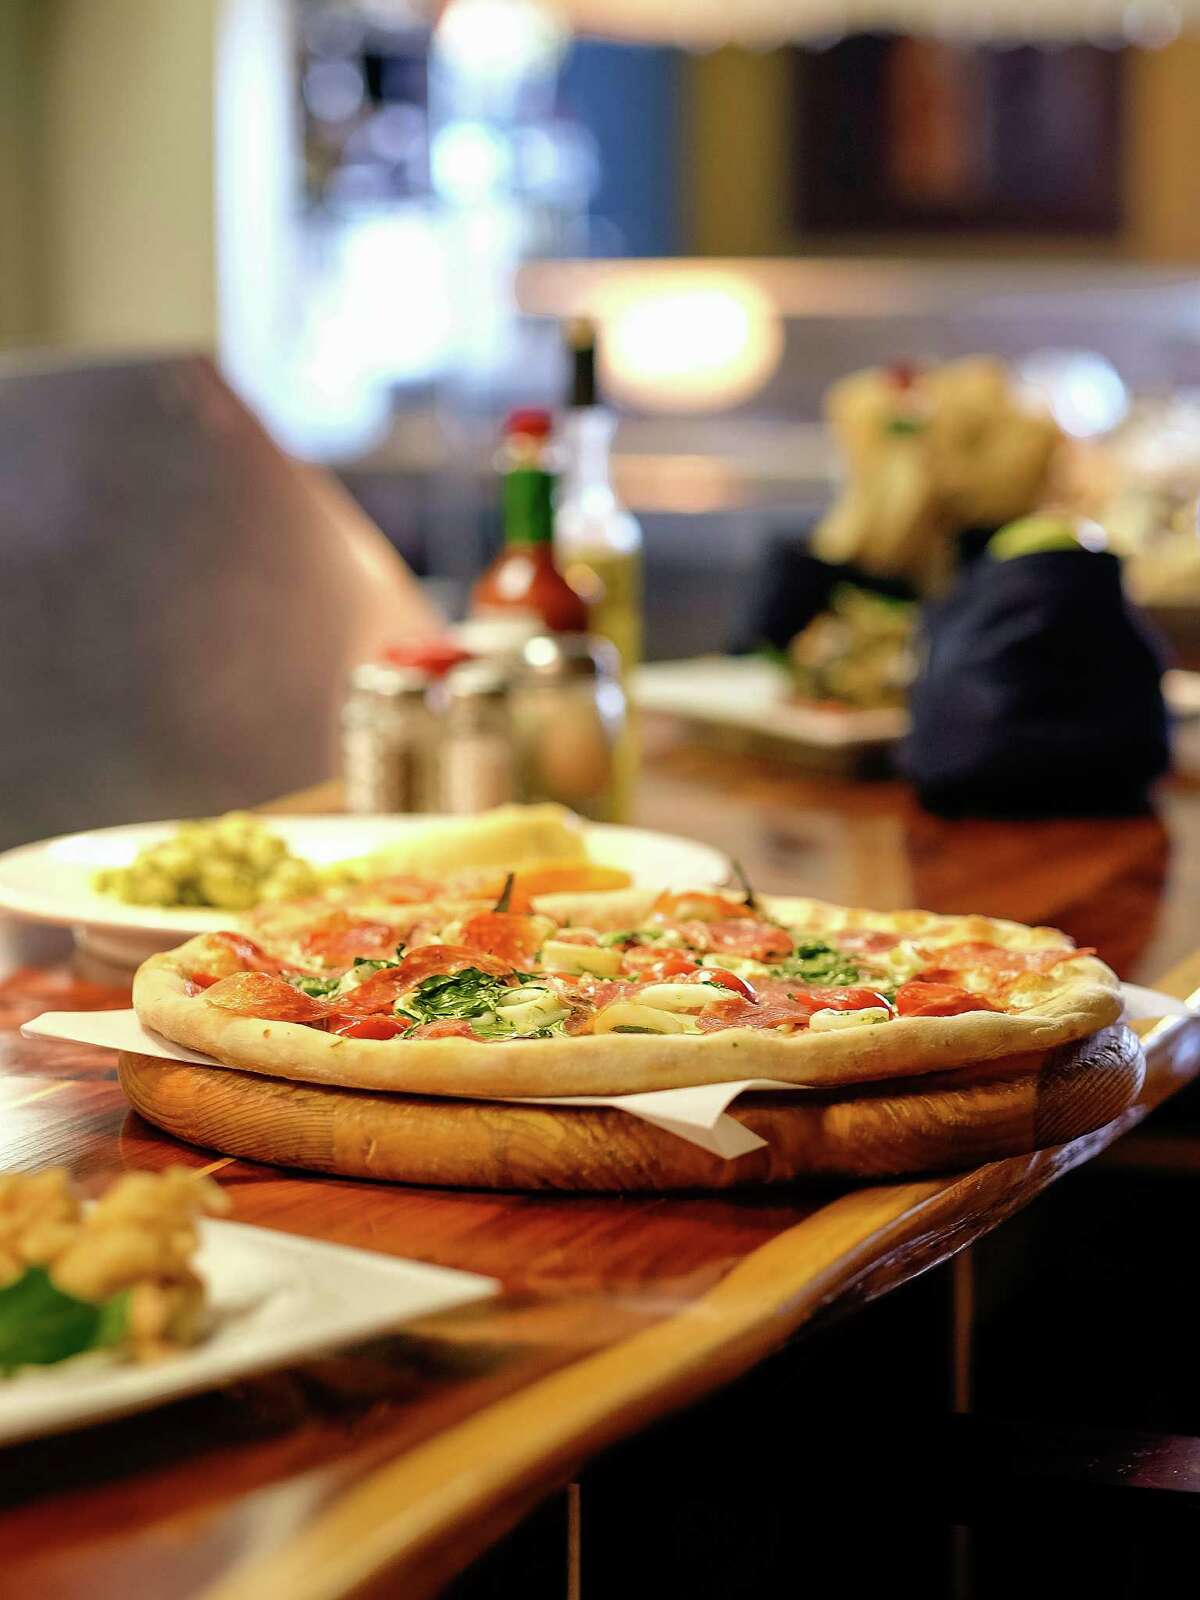 Bada Bing! Pizzeria offers a variety of pizzas with unusual toppings.